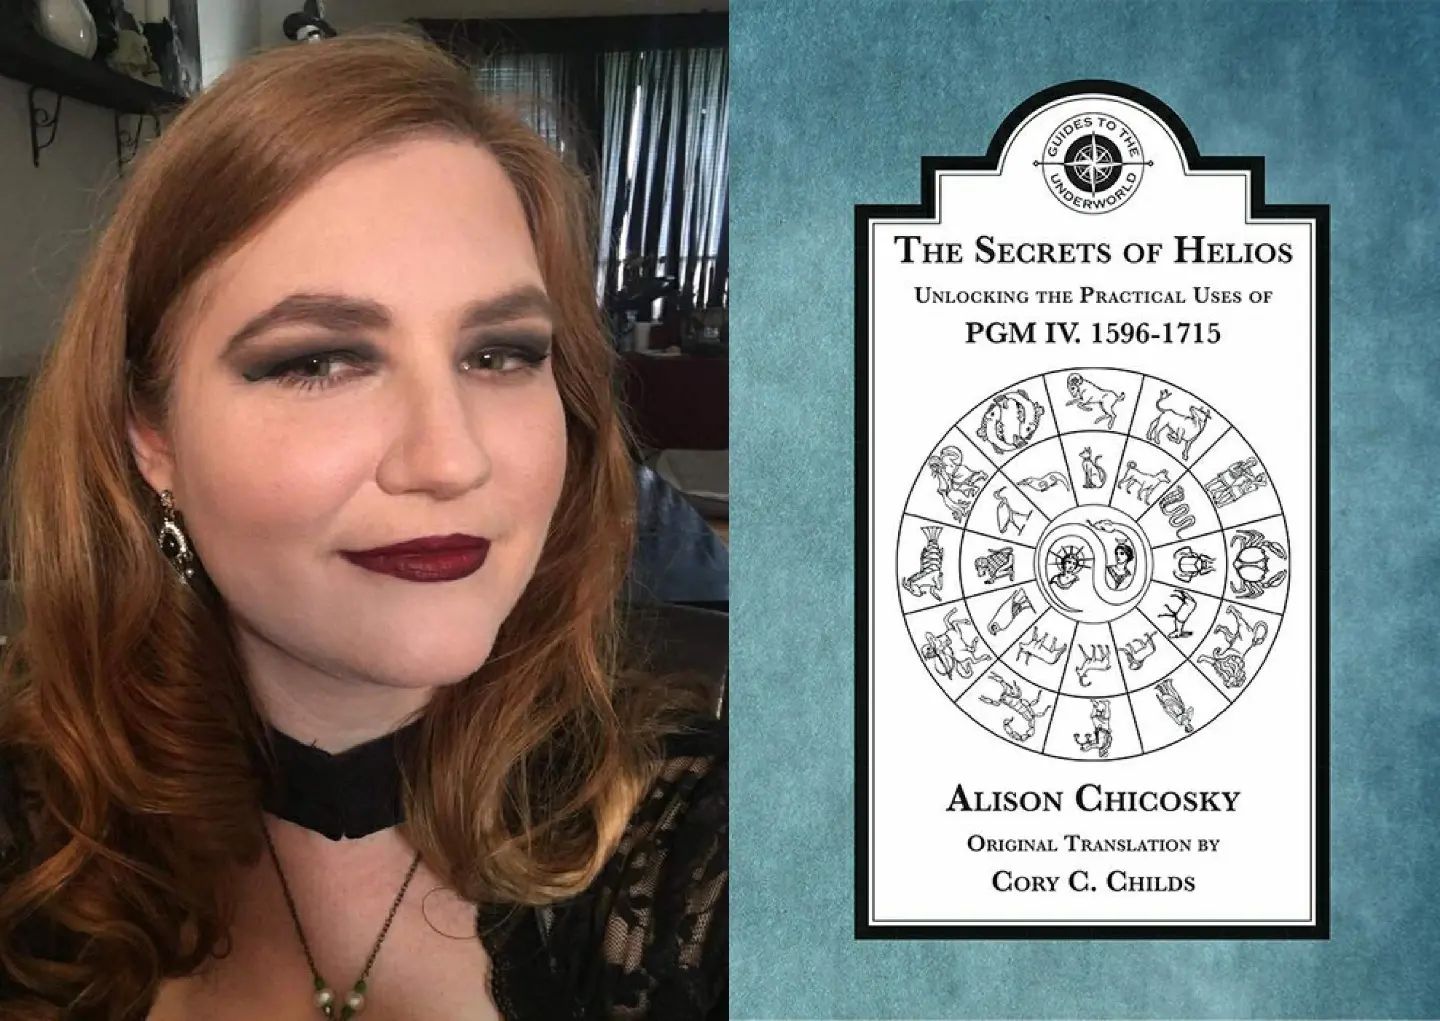 CMN Interviews: The Secrets of Helios and Getting Good with Alison Chicosky